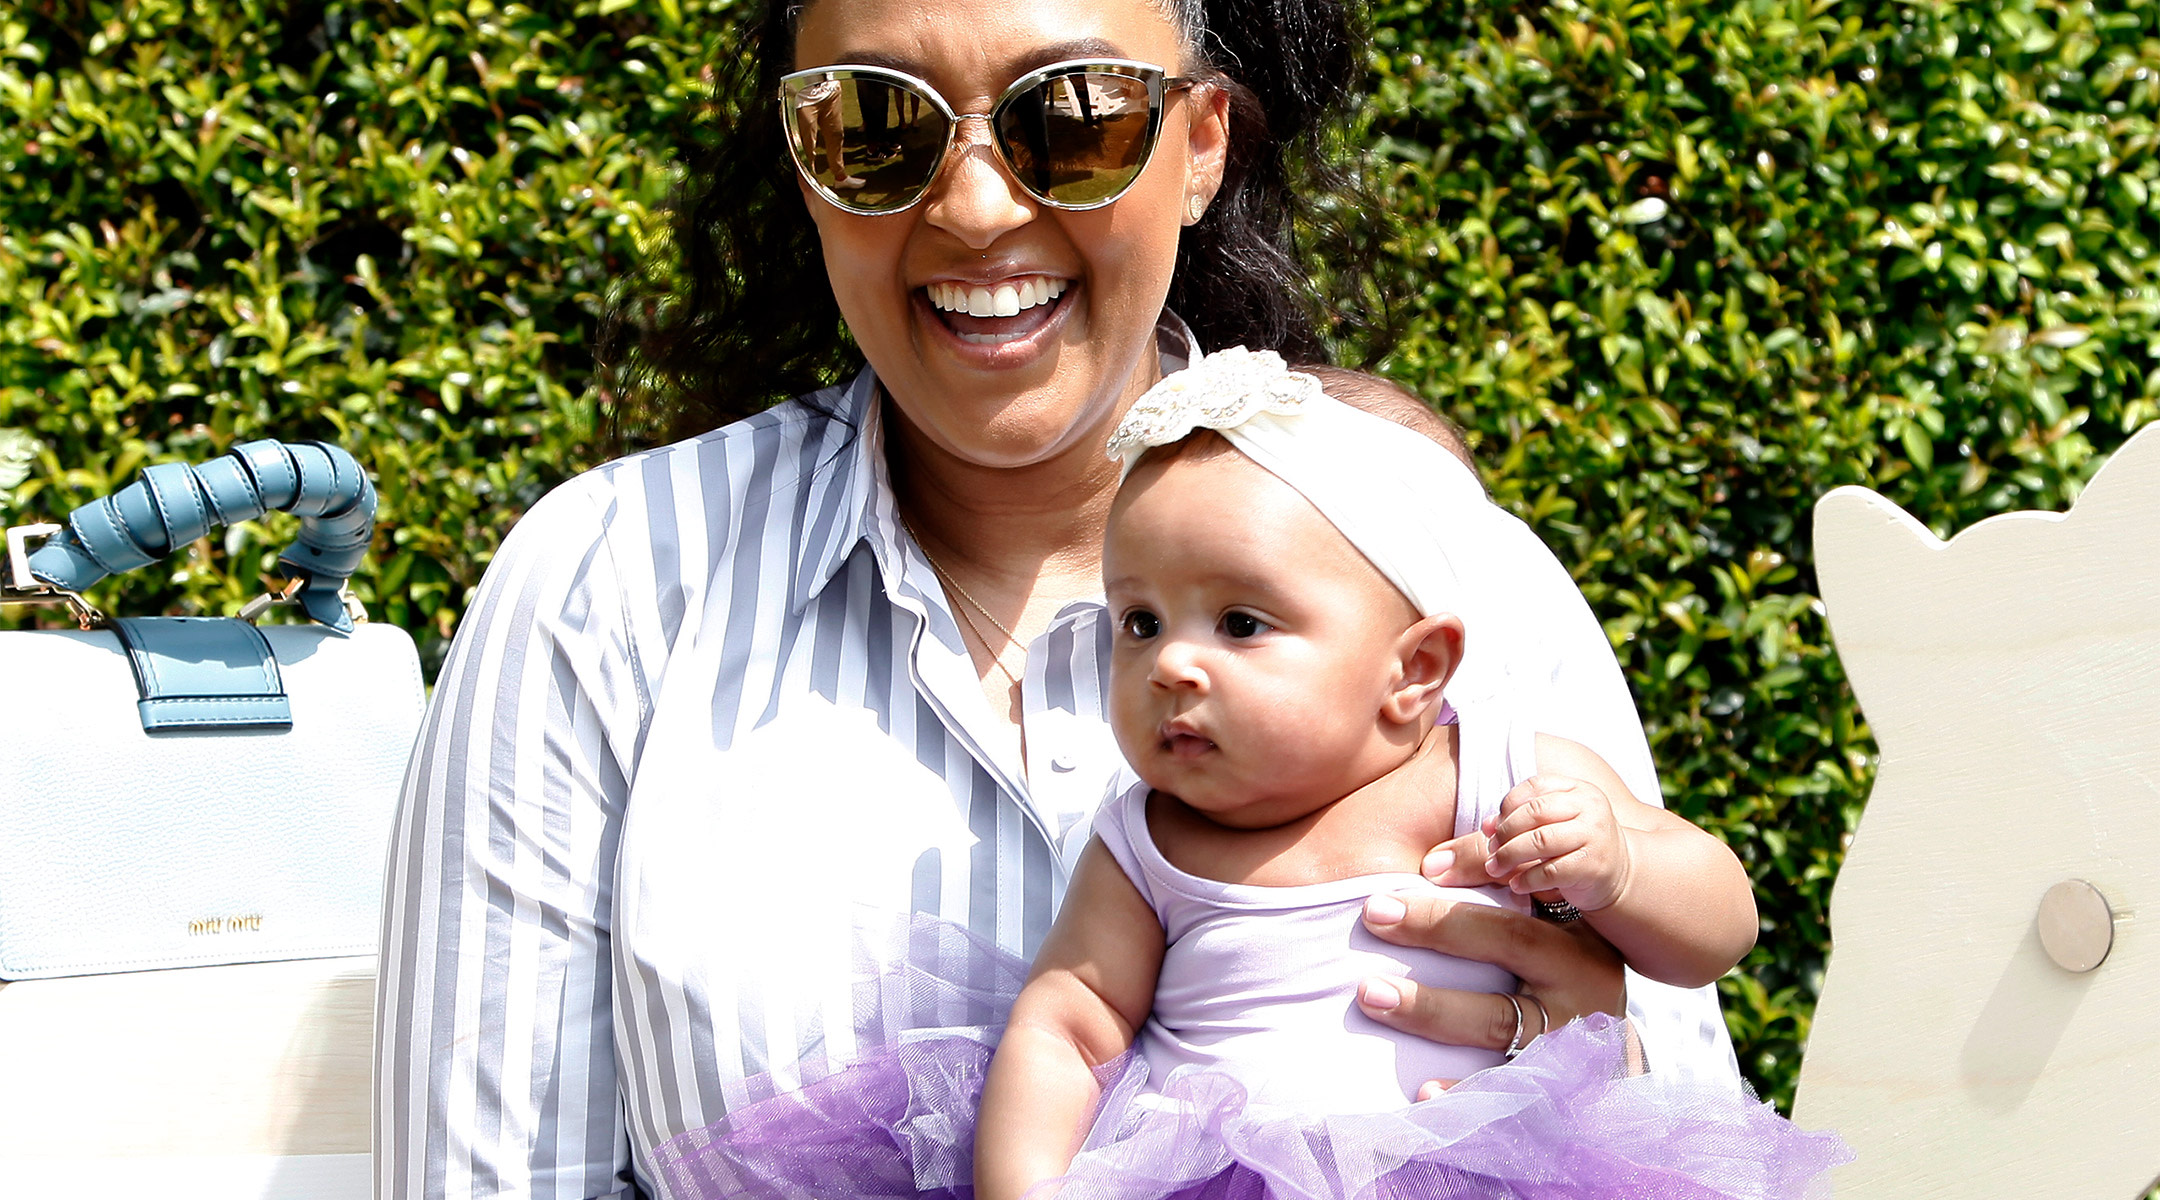 celebrity tia mowry happily holding her baby girl who is wearing a purple tutu